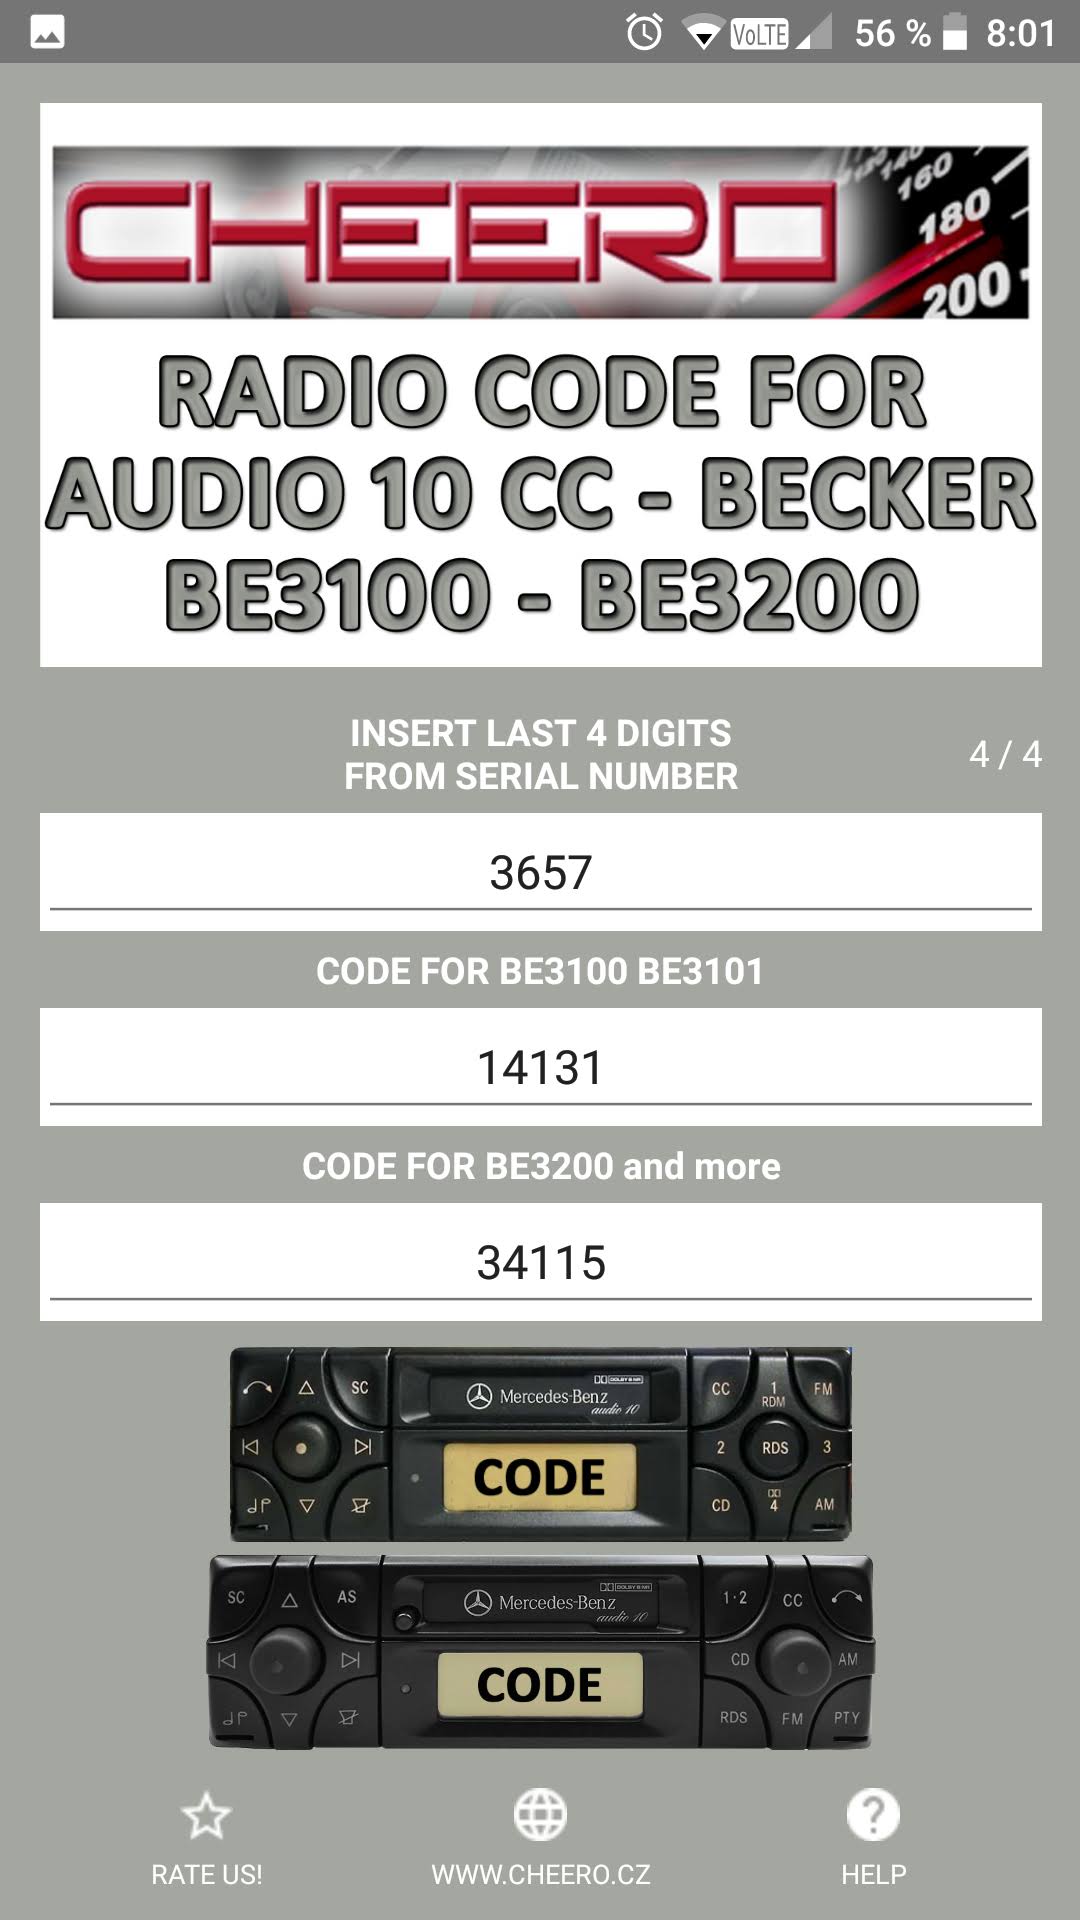 RADIO CODE for MERCEDES BENZ AUDIO 10 CC BECKER BE3100 BE3101 BE3200 BE3201 etc.